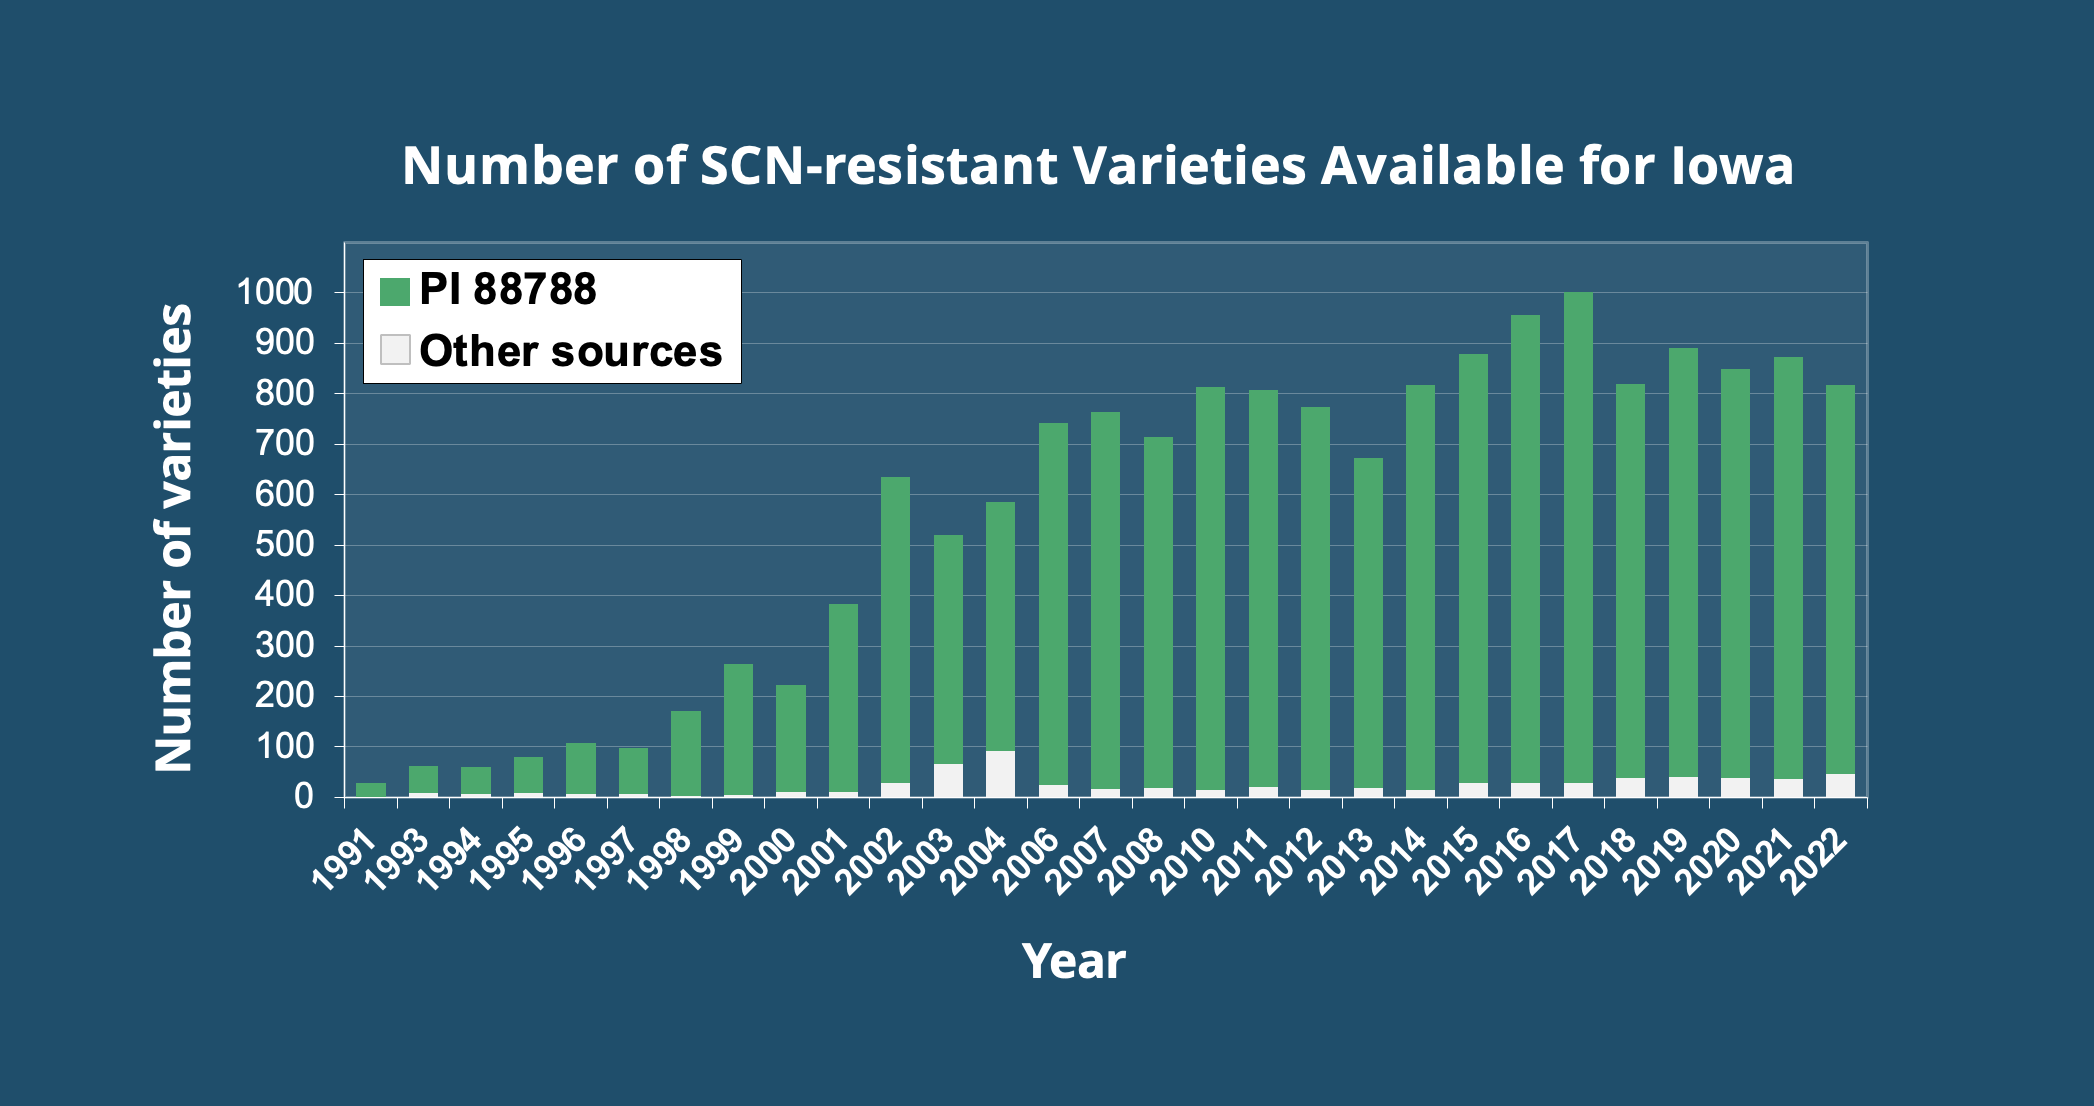 A graph showing the number of SCN-resistant varieties available in Iowa.